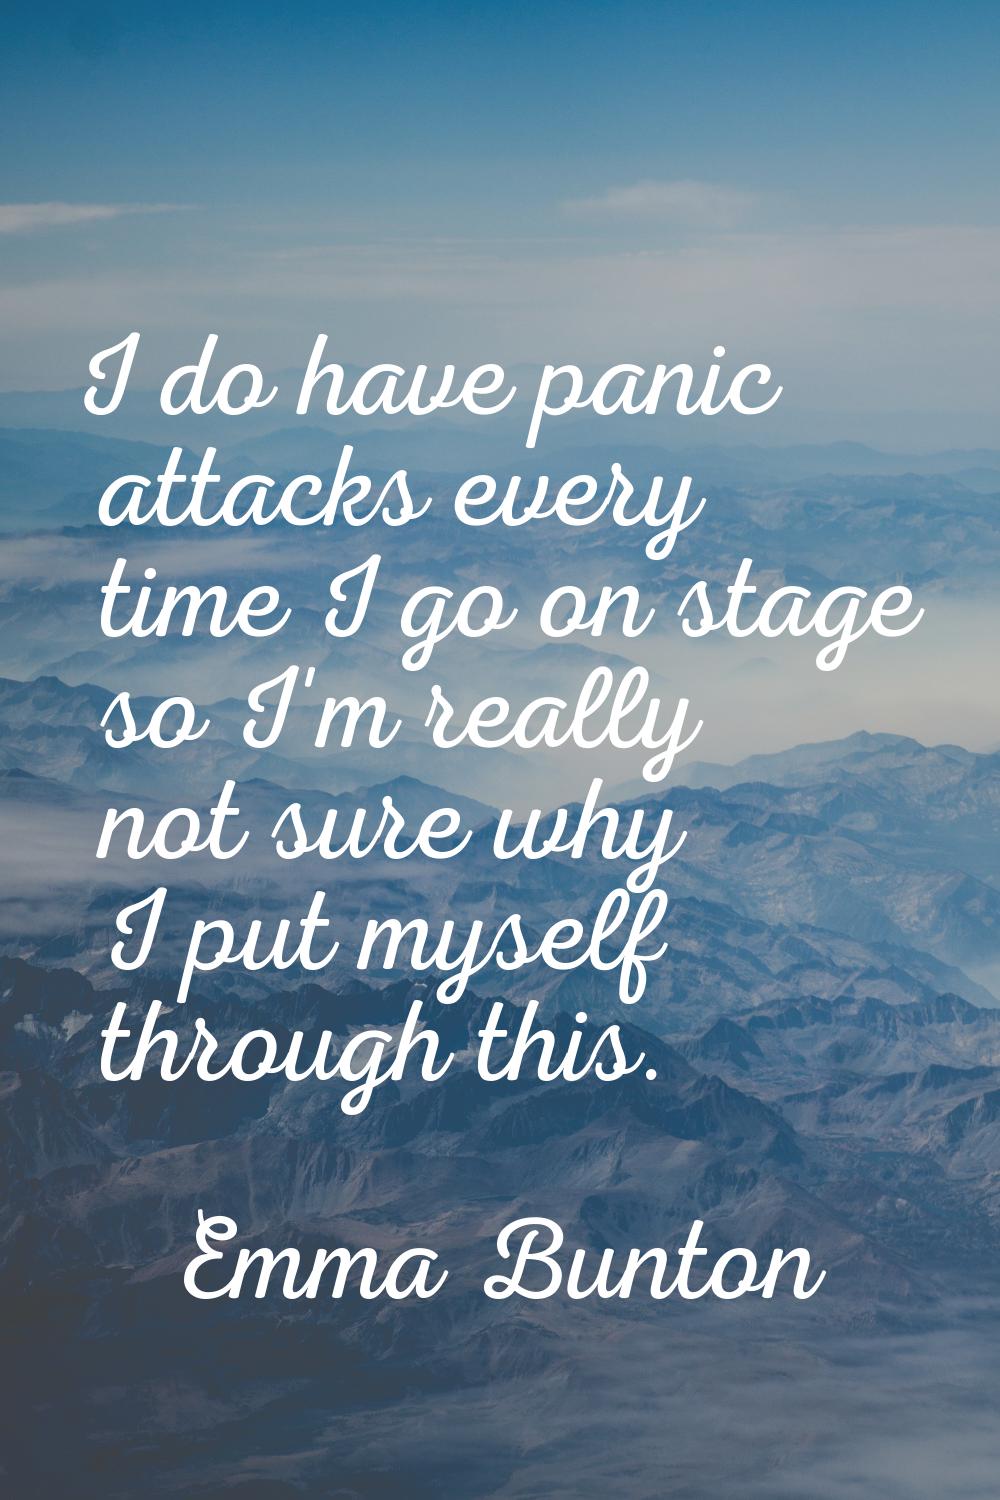 I do have panic attacks every time I go on stage so I'm really not sure why I put myself through th